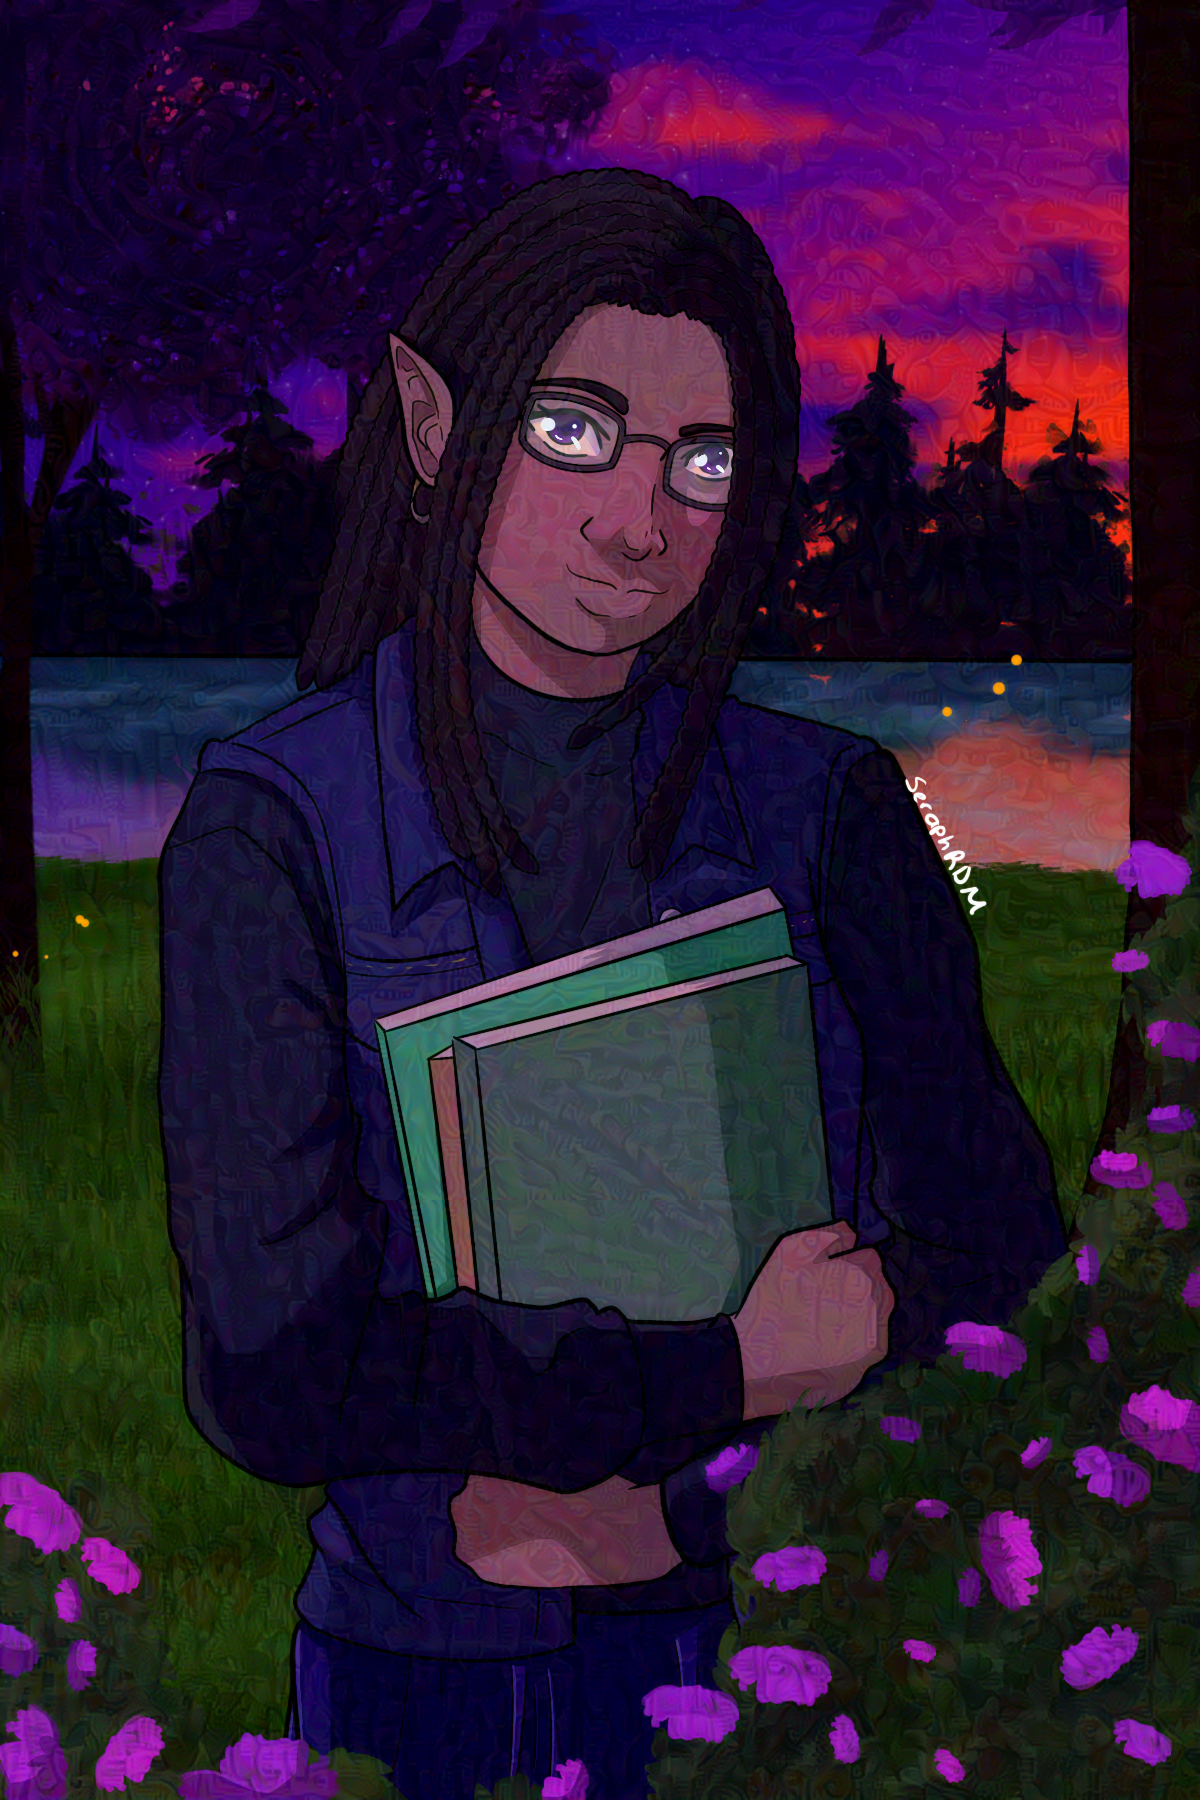 A drawing of a black female elf with her hair in braids. She is wearing a pair of purple framed glasses, a denim vest over top of a sweater. In front of her are some bushes with flowers. Behind her are some trees, a lake, and it is sunset in the picture